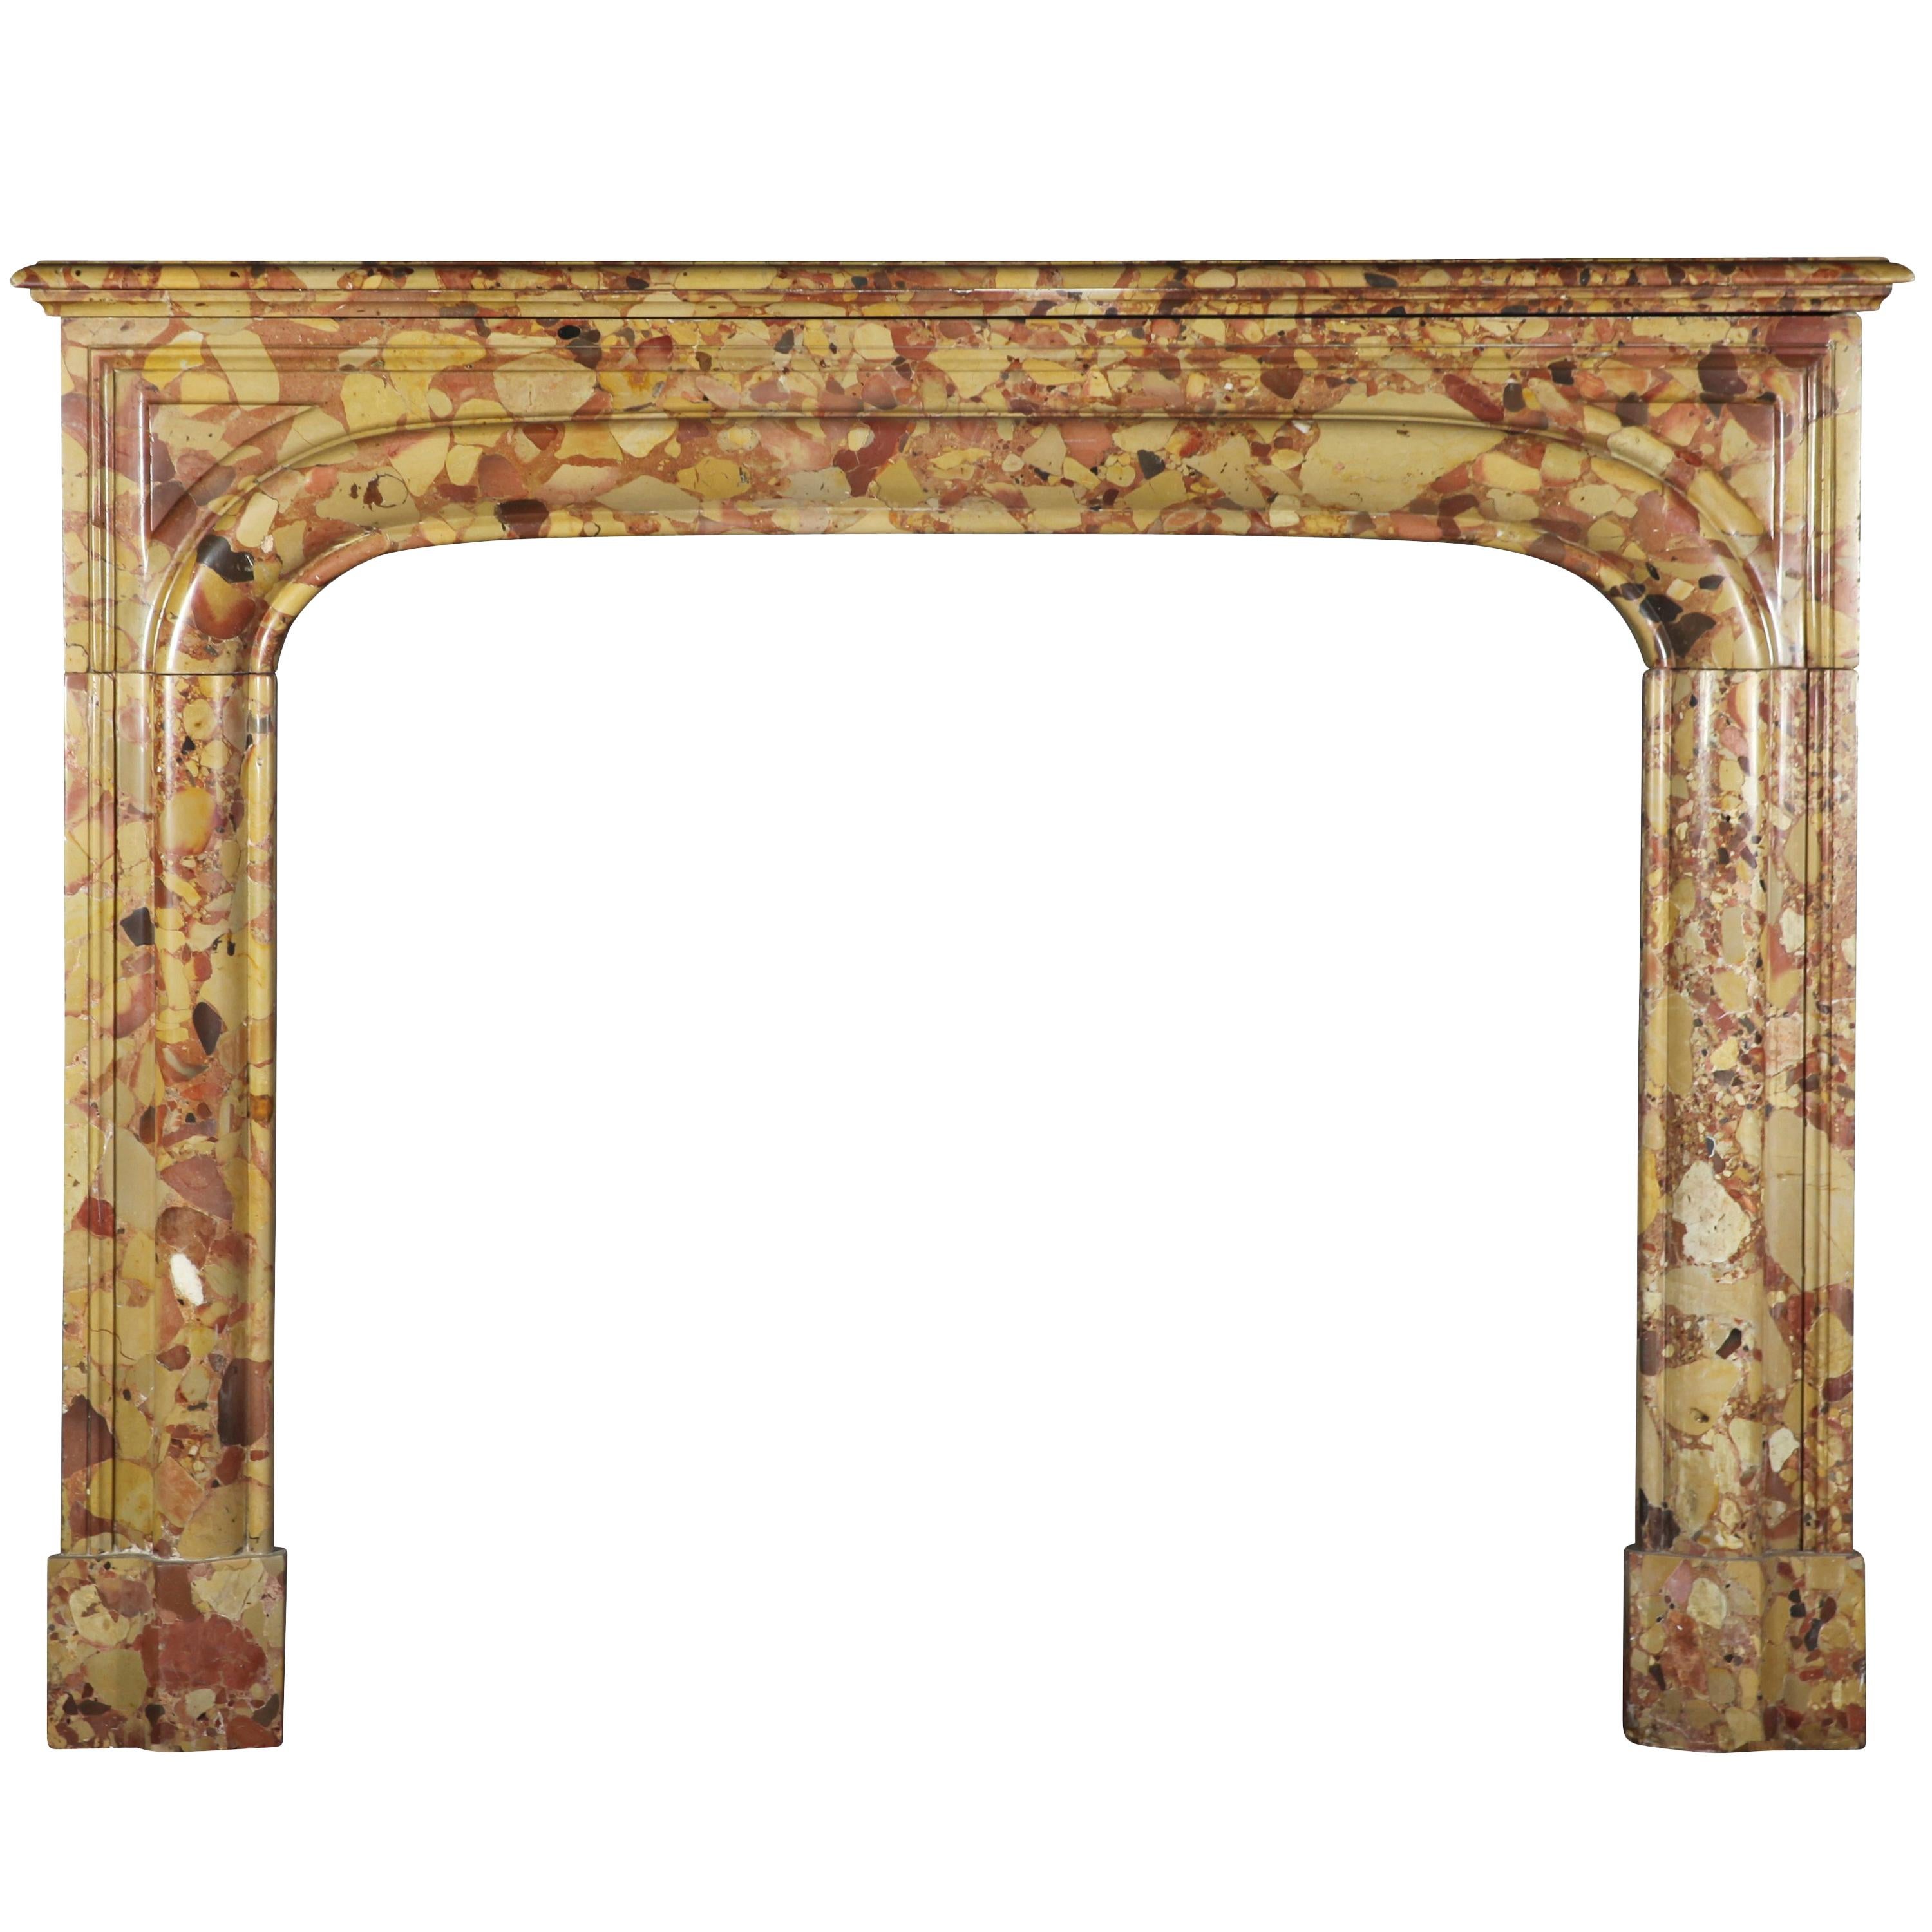 Classic French Antique Fireplace Surround in Royal Breche D'aleppo Marble For Sale